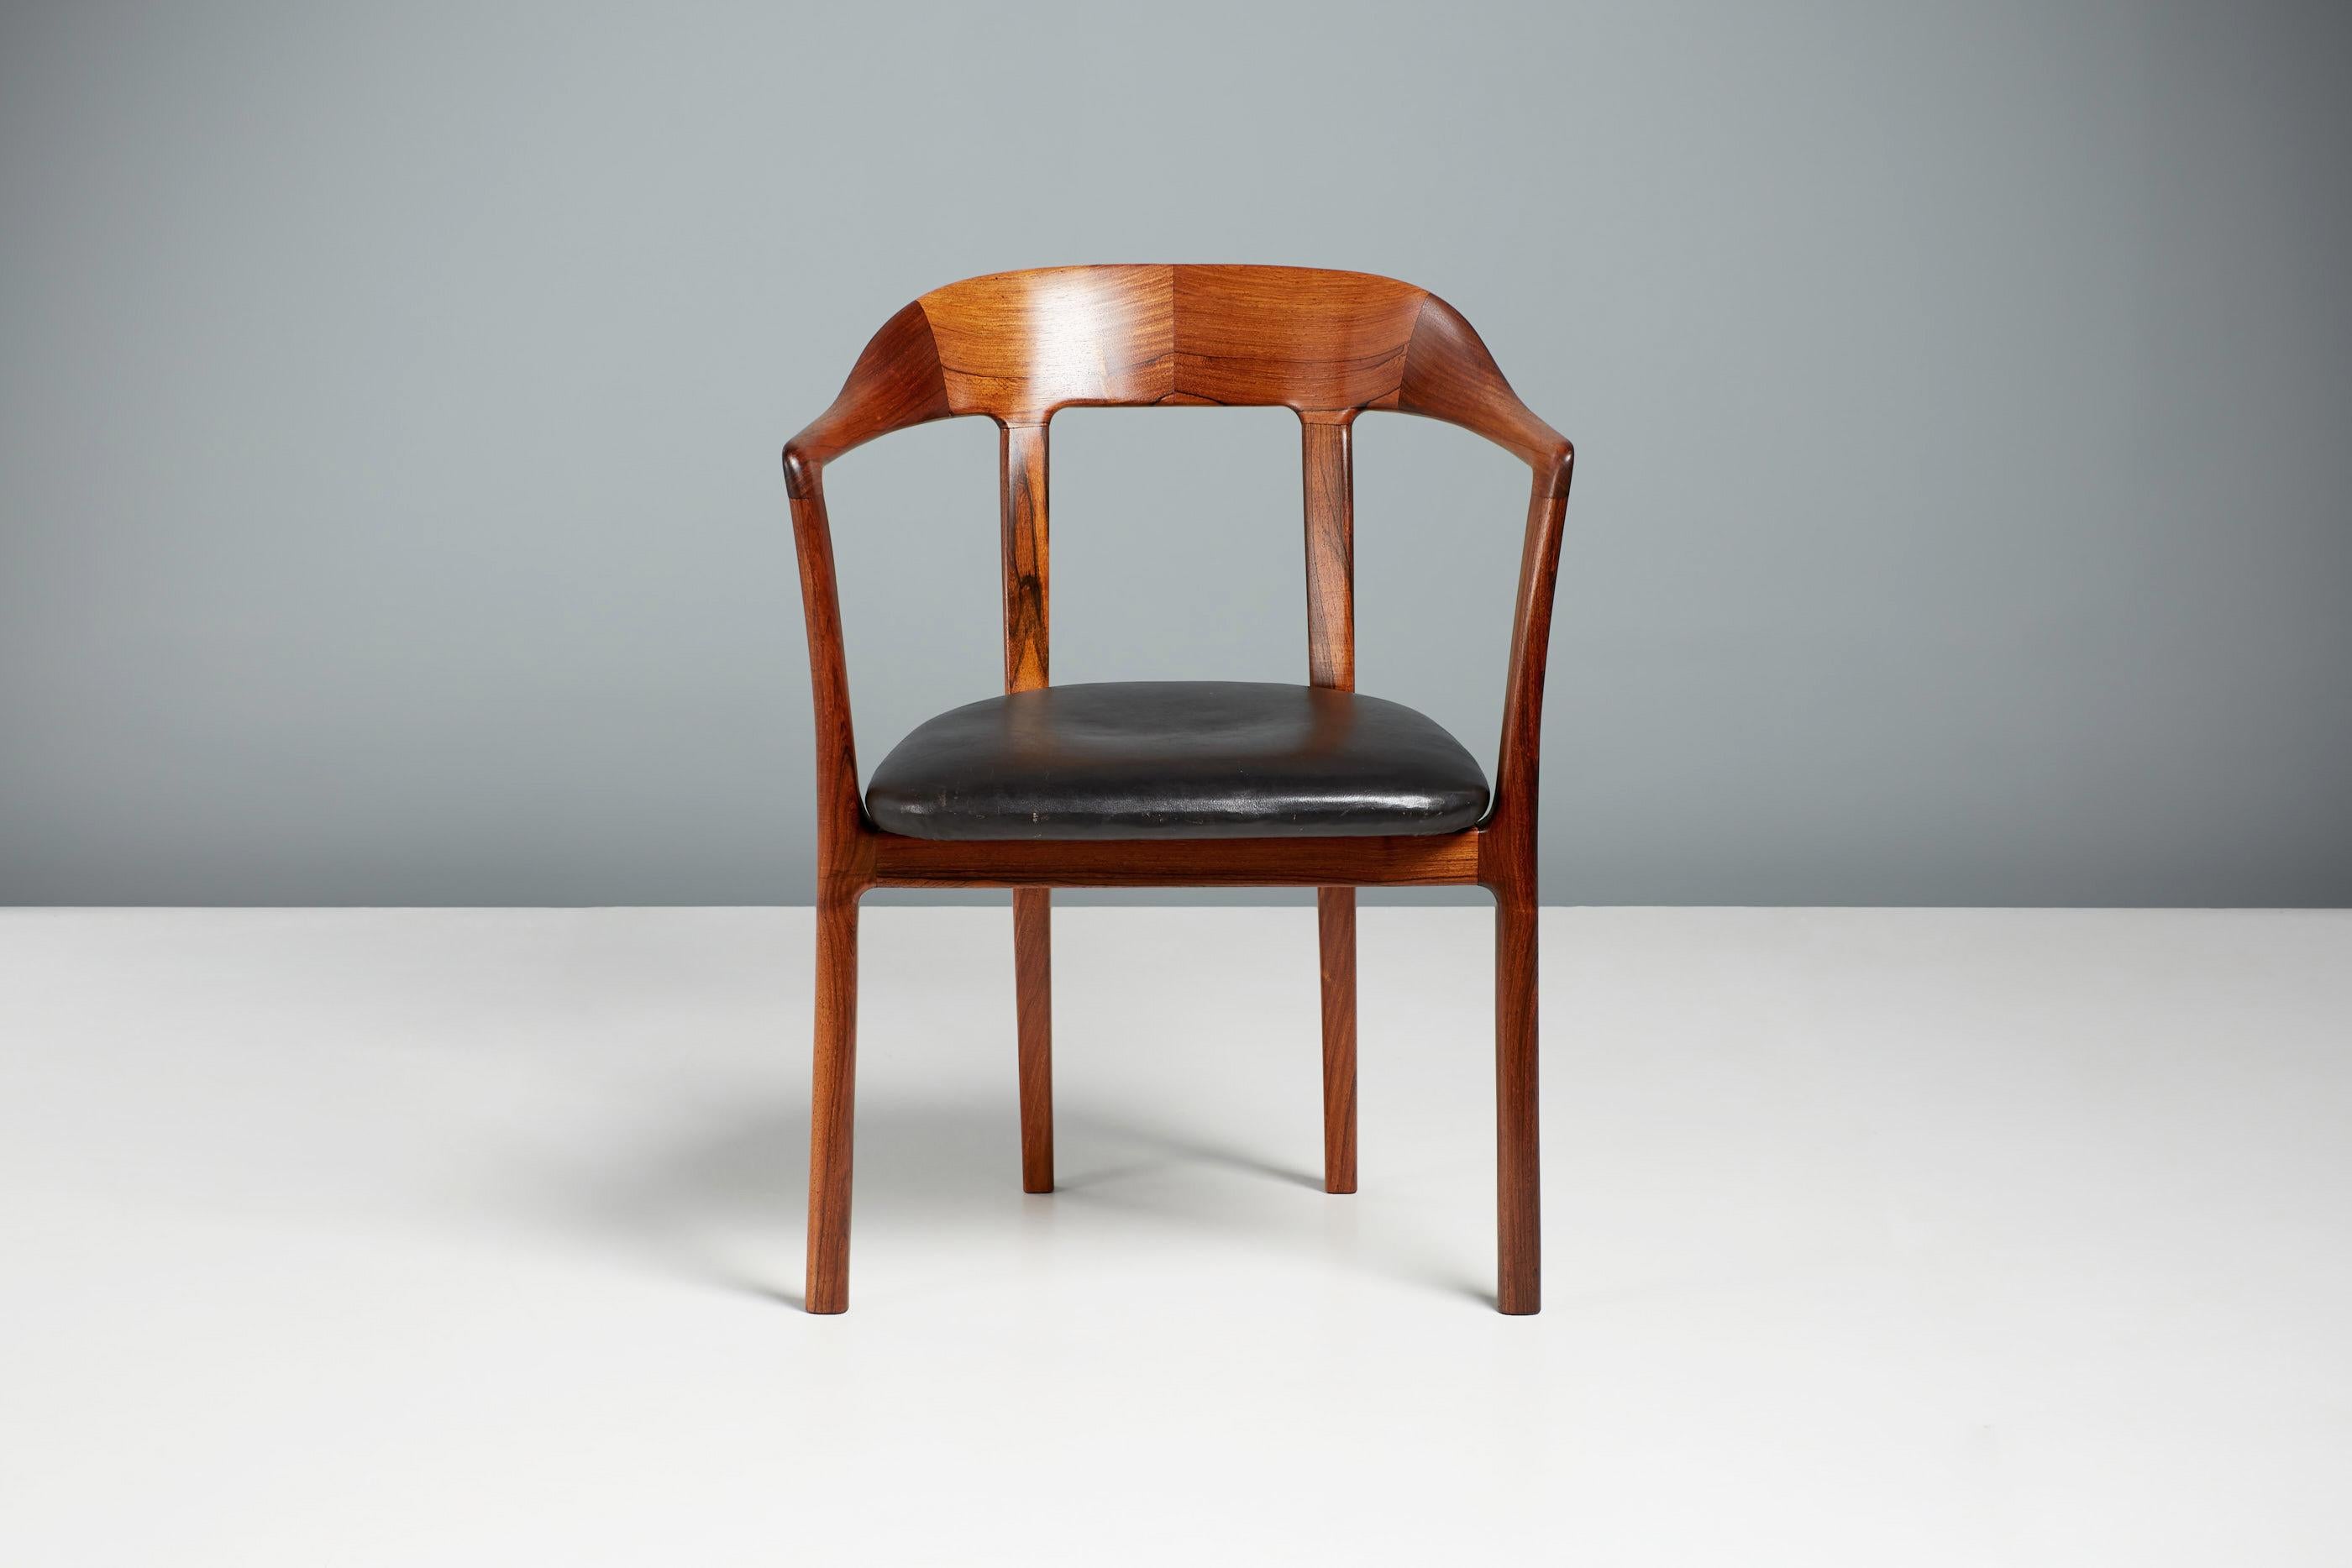 Ole Wanscher - Princess Armchair, 1958

The Model J2883 designed by master-designer Ole Wanscher in 1958, acquired its nickname thanks to a Danish princess who purchased the chair during a visit to the Cabinetmakers' Guild Exhibition in Copenhagen.